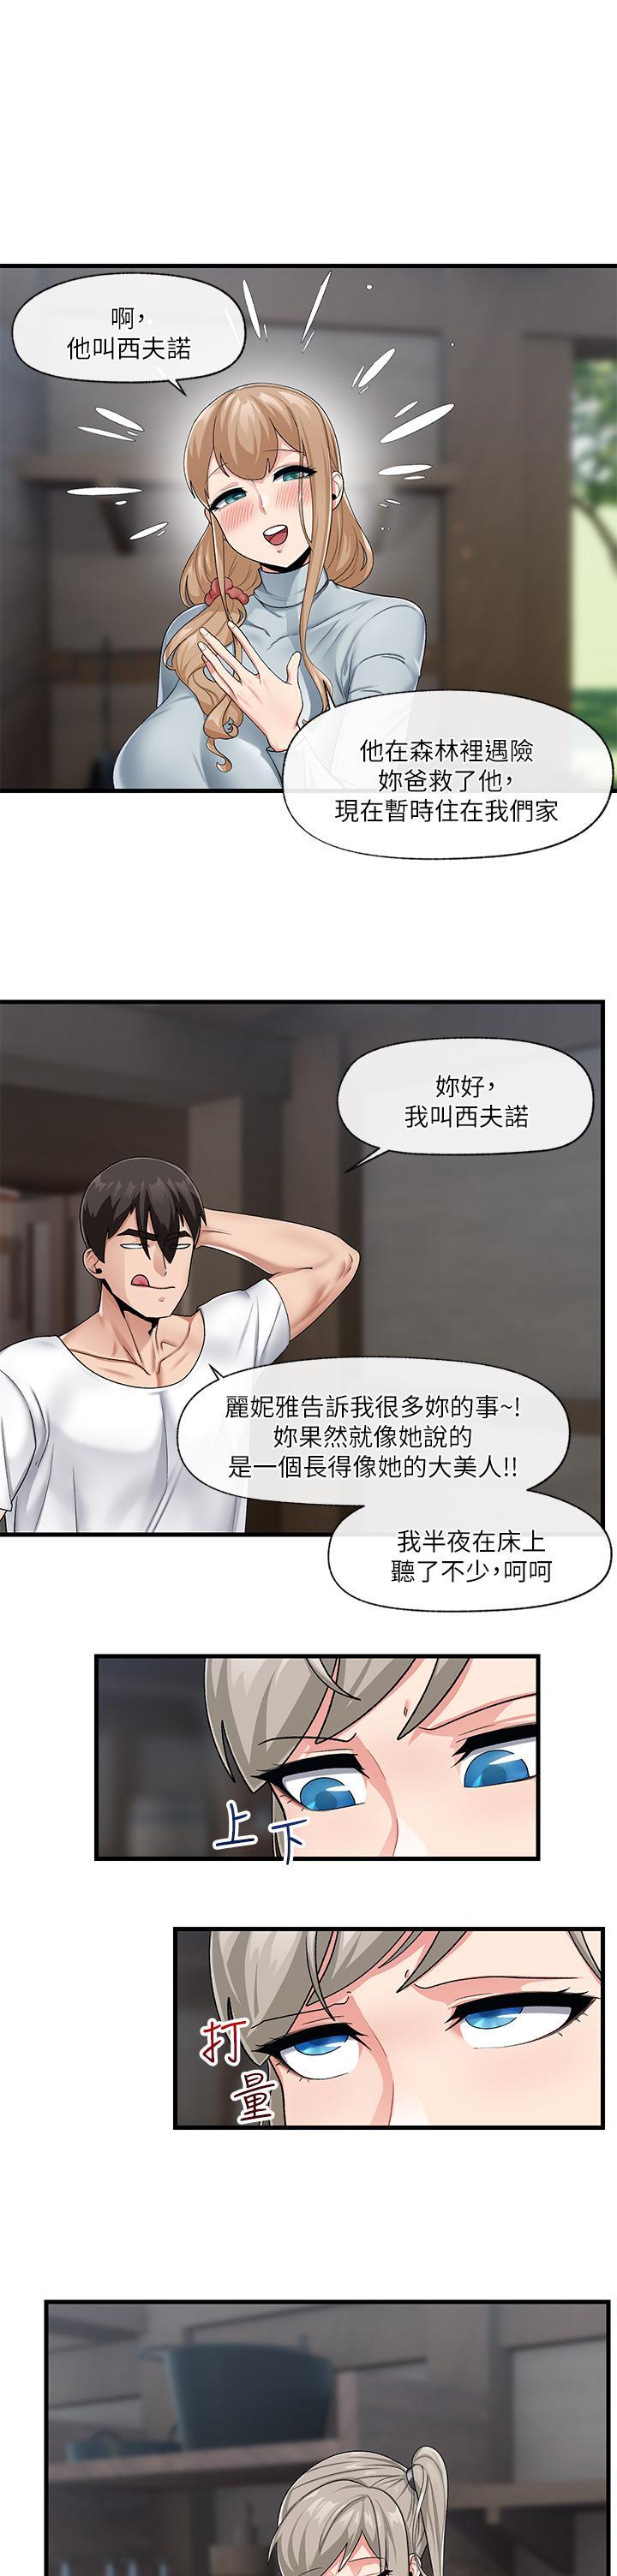 18yo King of hypnotist in Isekai (21-30)-chinese Mexicano - Page 2